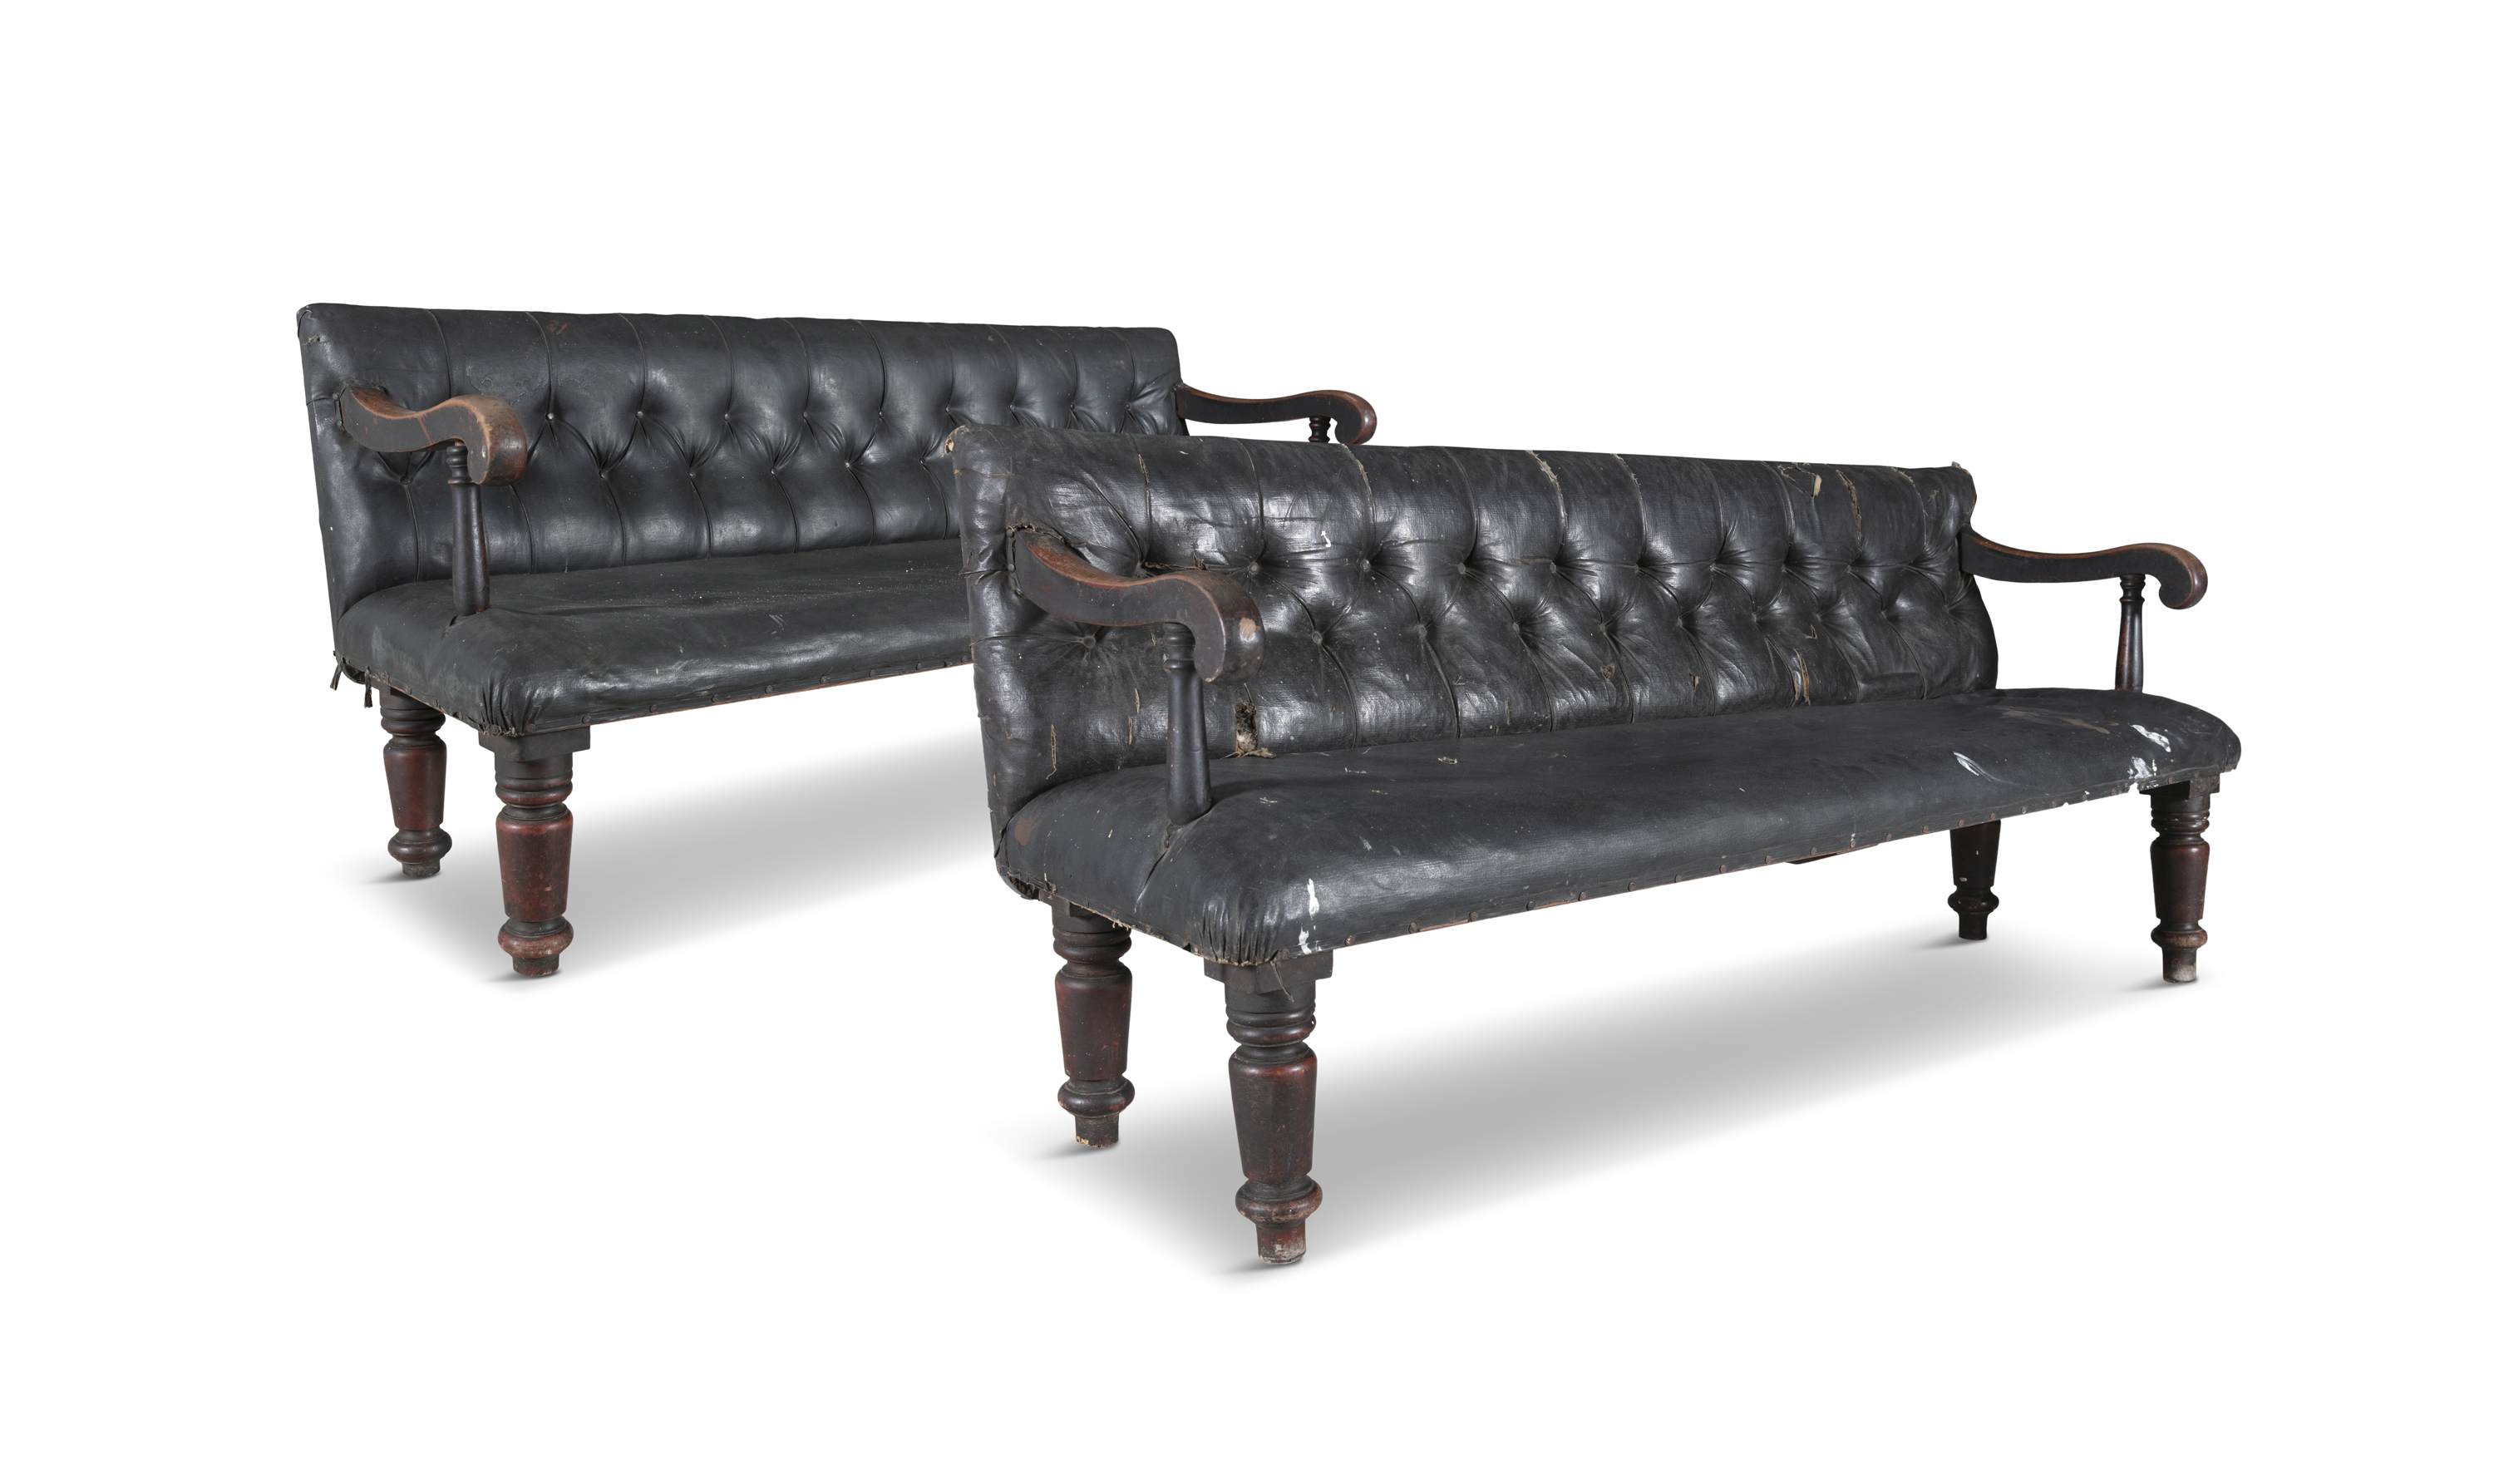 A PAIR OF 19TH CENTURY MAHOGANY FRAMED LONG CLUB SEATS, with black leather buttoned backs and